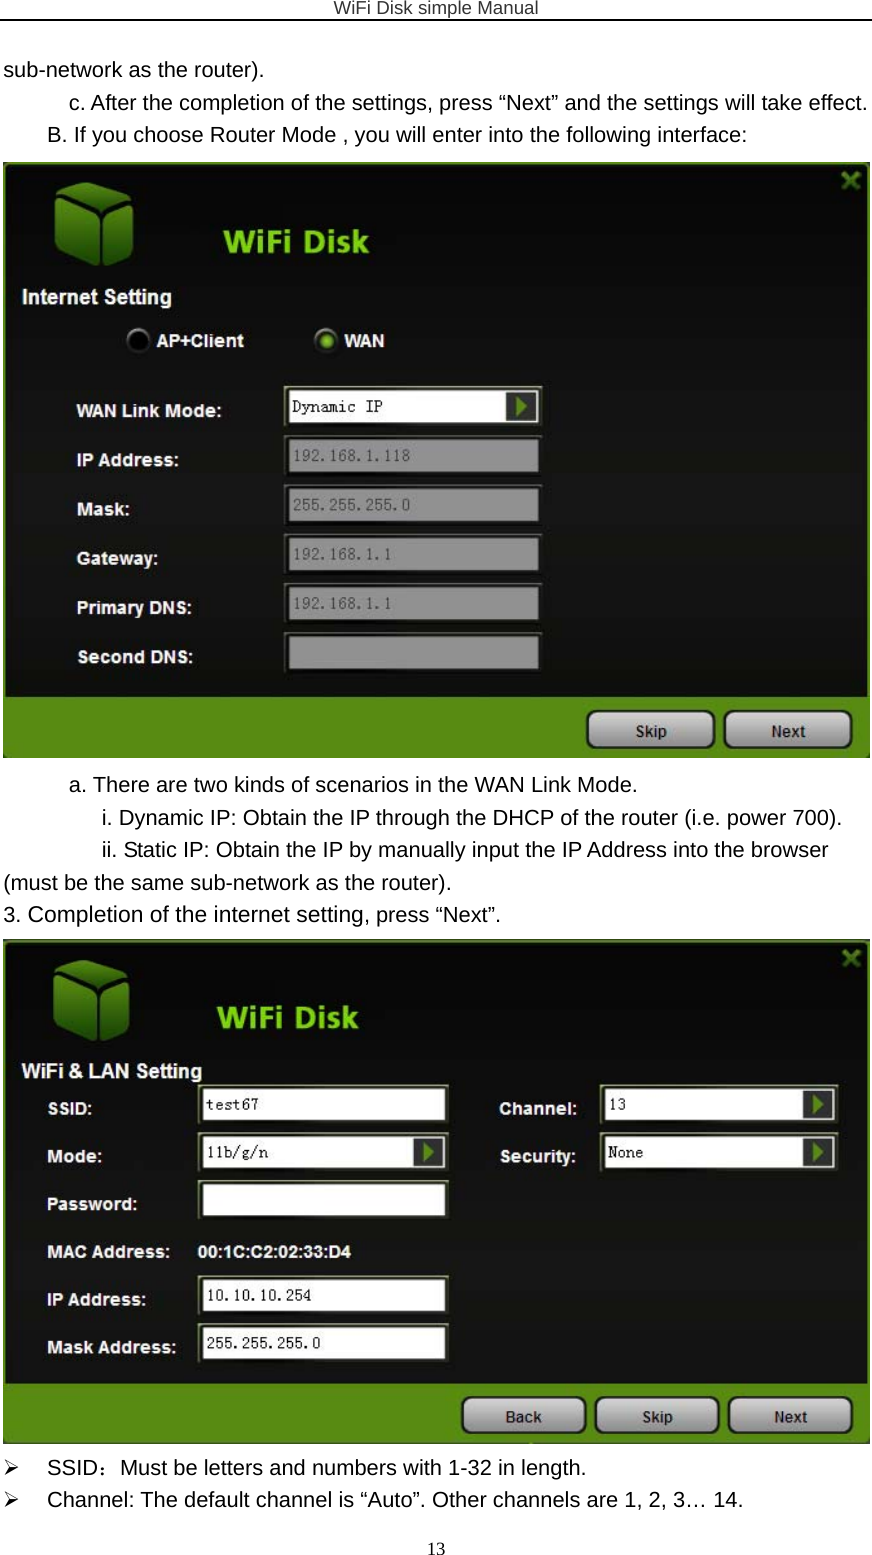 WiFi Disk simple Manual  13sub-network as the router).   c. After the completion of the settings, press “Next” and the settings will take effect. B. If you choose Router Mode , you will enter into the following interface:  a. There are two kinds of scenarios in the WAN Link Mode. i. Dynamic IP: Obtain the IP through the DHCP of the router (i.e. power 700). ii. Static IP: Obtain the IP by manually input the IP Address into the browser (must be the same sub-network as the router). 3. Completion of the internet setting, press “Next”.   SSID：Must be letters and numbers with 1-32 in length.   Channel: The default channel is “Auto”. Other channels are 1, 2, 3… 14. 